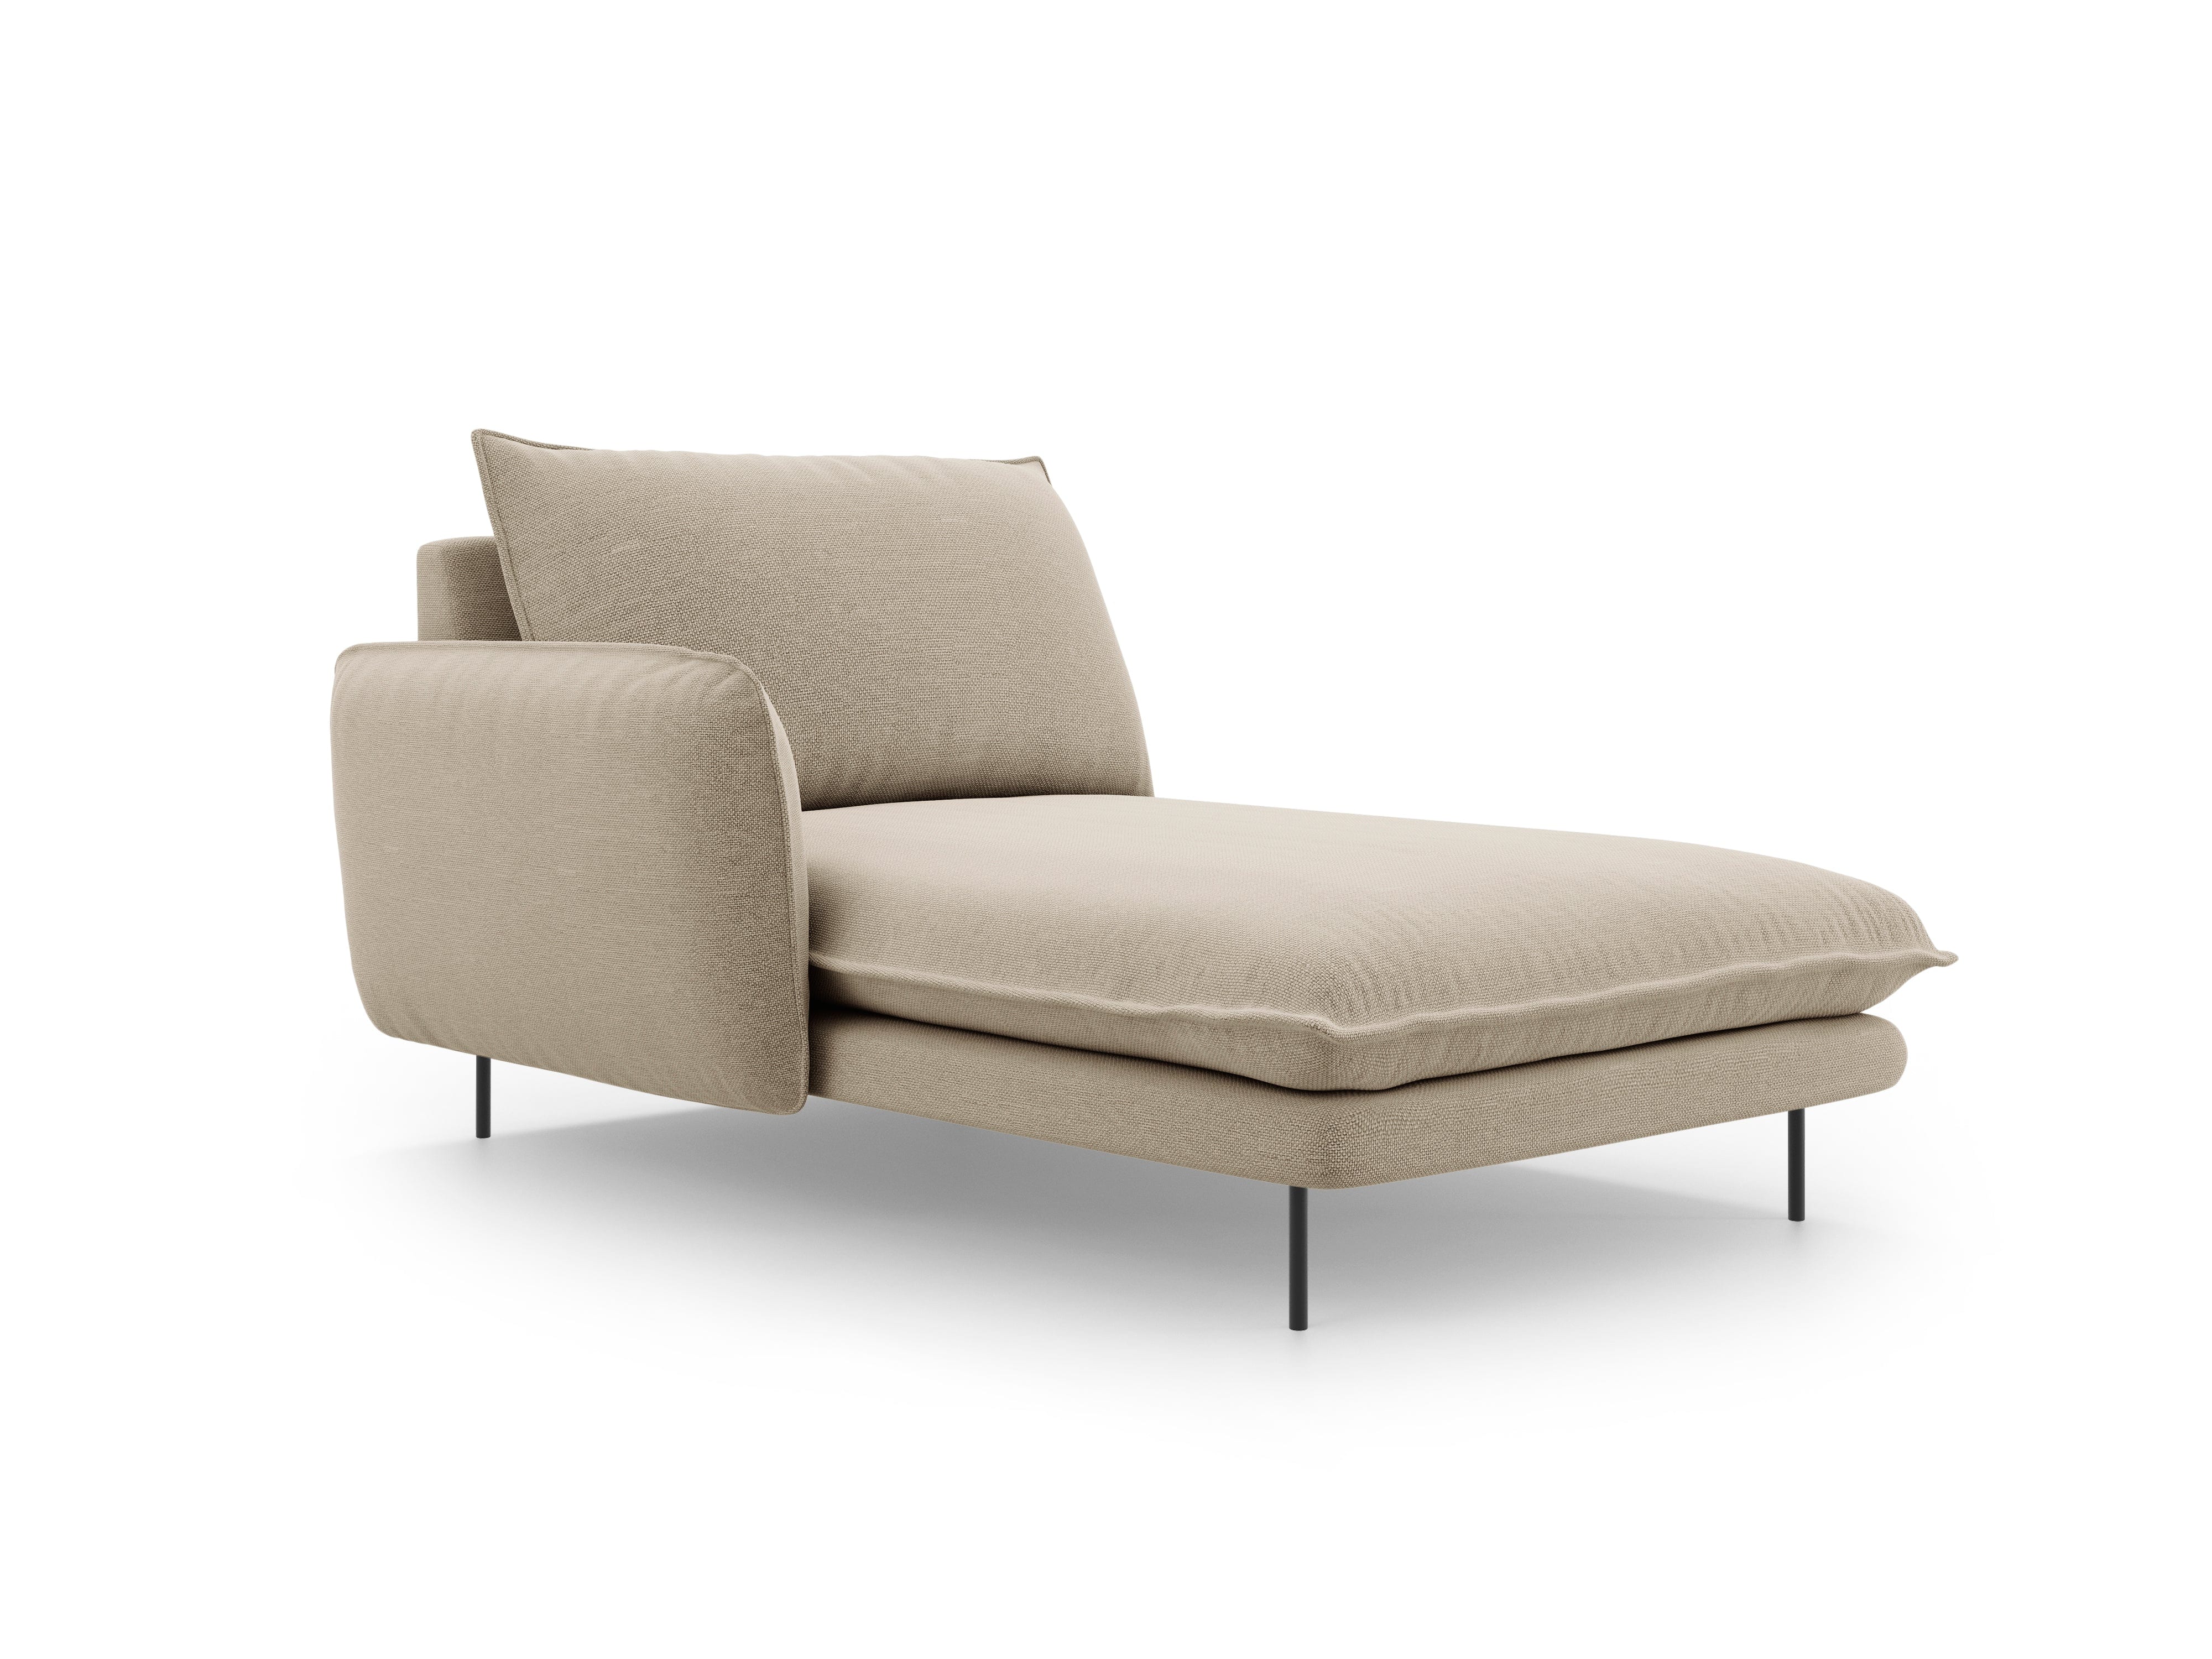 Lefthand chaise longue VIENNA beige with black base